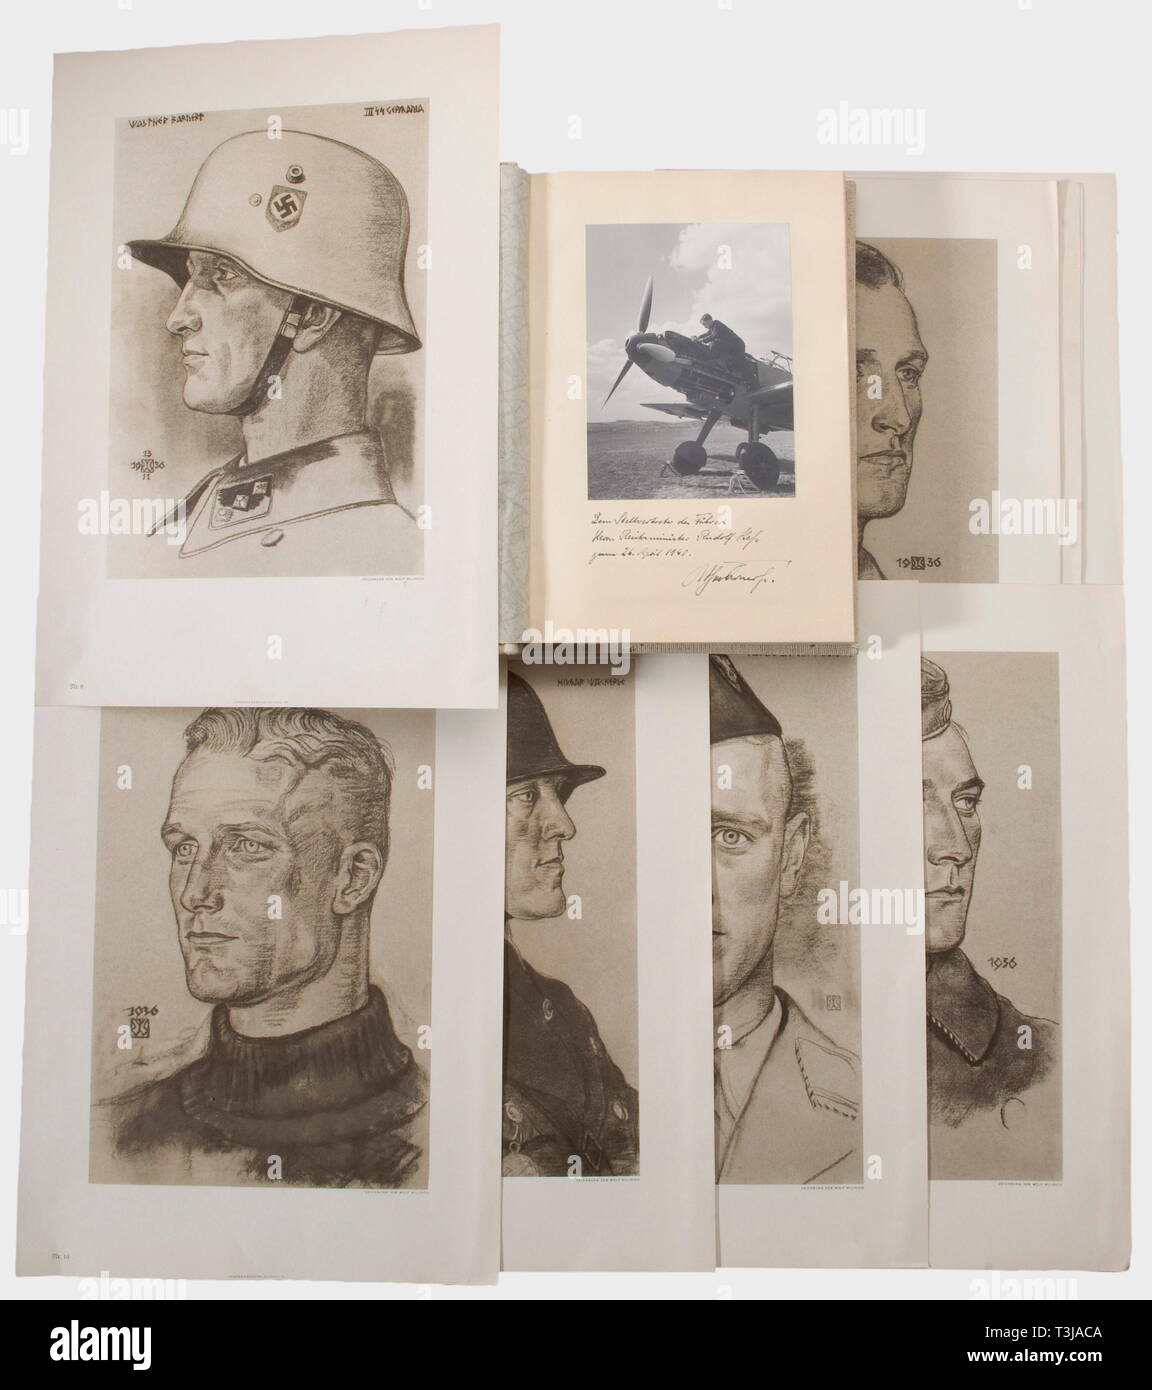 Rudolf Heß, a stereogram album, model plants 1939, and twelve Willrich prints 'The National Socialist Model Plants 1939' complete with pictures and glasses, nearly new, and with the dedication on the flyleaf, 'Dem Stellvertreter des Führers - Herrn Reichsminister Rudolf Hess zum 26. April 1940 Achenbrenner(?)' (To the Führer's Deputy - Reichs Minister Rudolf Hess on 26 April 1940, Achenbrenner(?)). Also twelve rare printed plates with pictures of soldiers by Wolf Willrich 1936 - Förster & Borries, Zwickau. Dimensions 42 x 30 cm. Included is a portrait of Th. Wisch of the Ad, Editorial-Use-Only Stock Photo